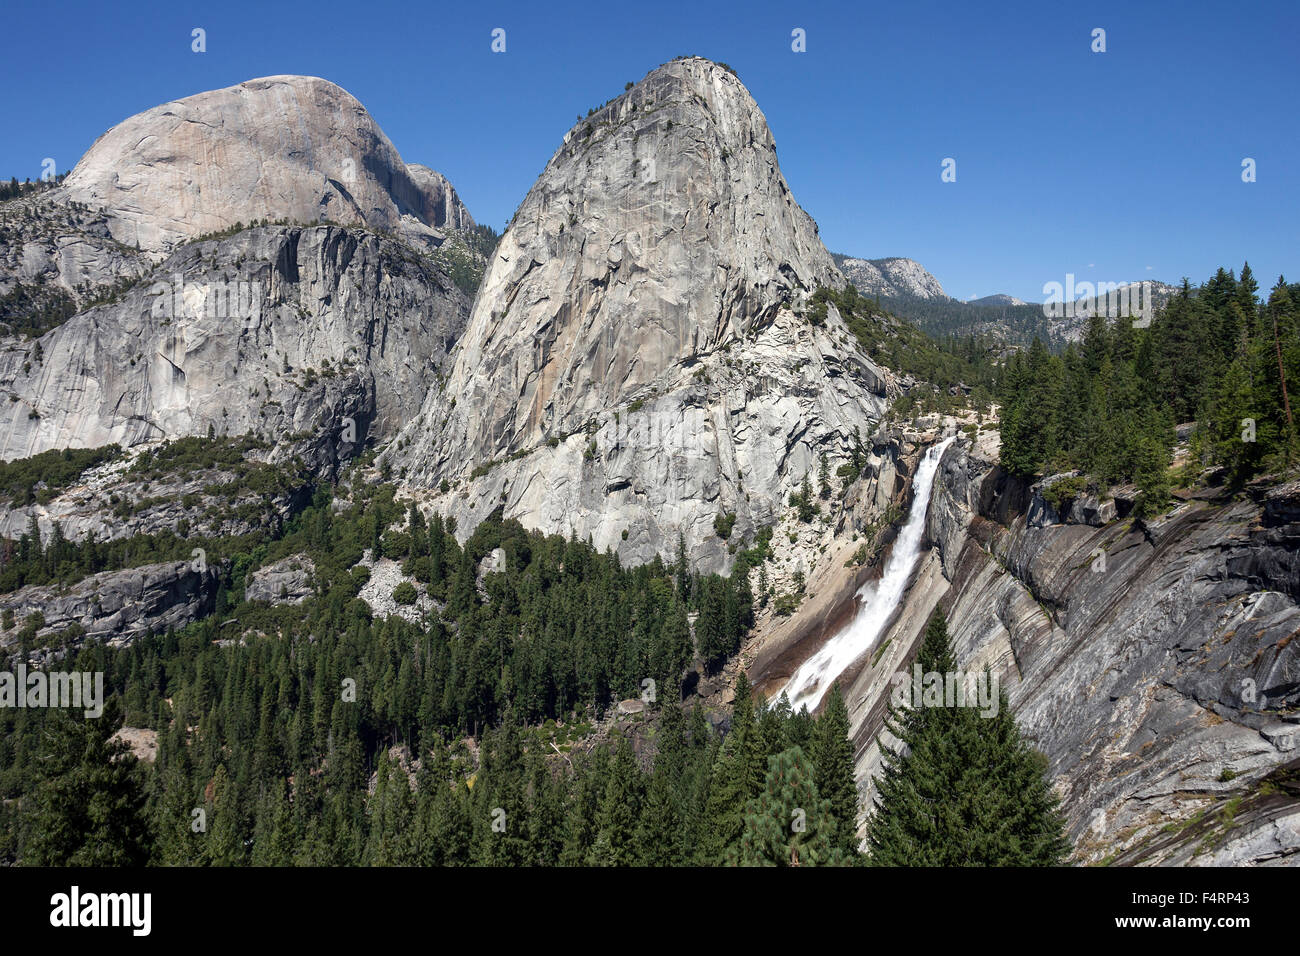 View from John Muir Trail to Nevada Fall, Liberty Cap in the center, Half Dome at the rear left, Yosemite National Park, USA Stock Photo